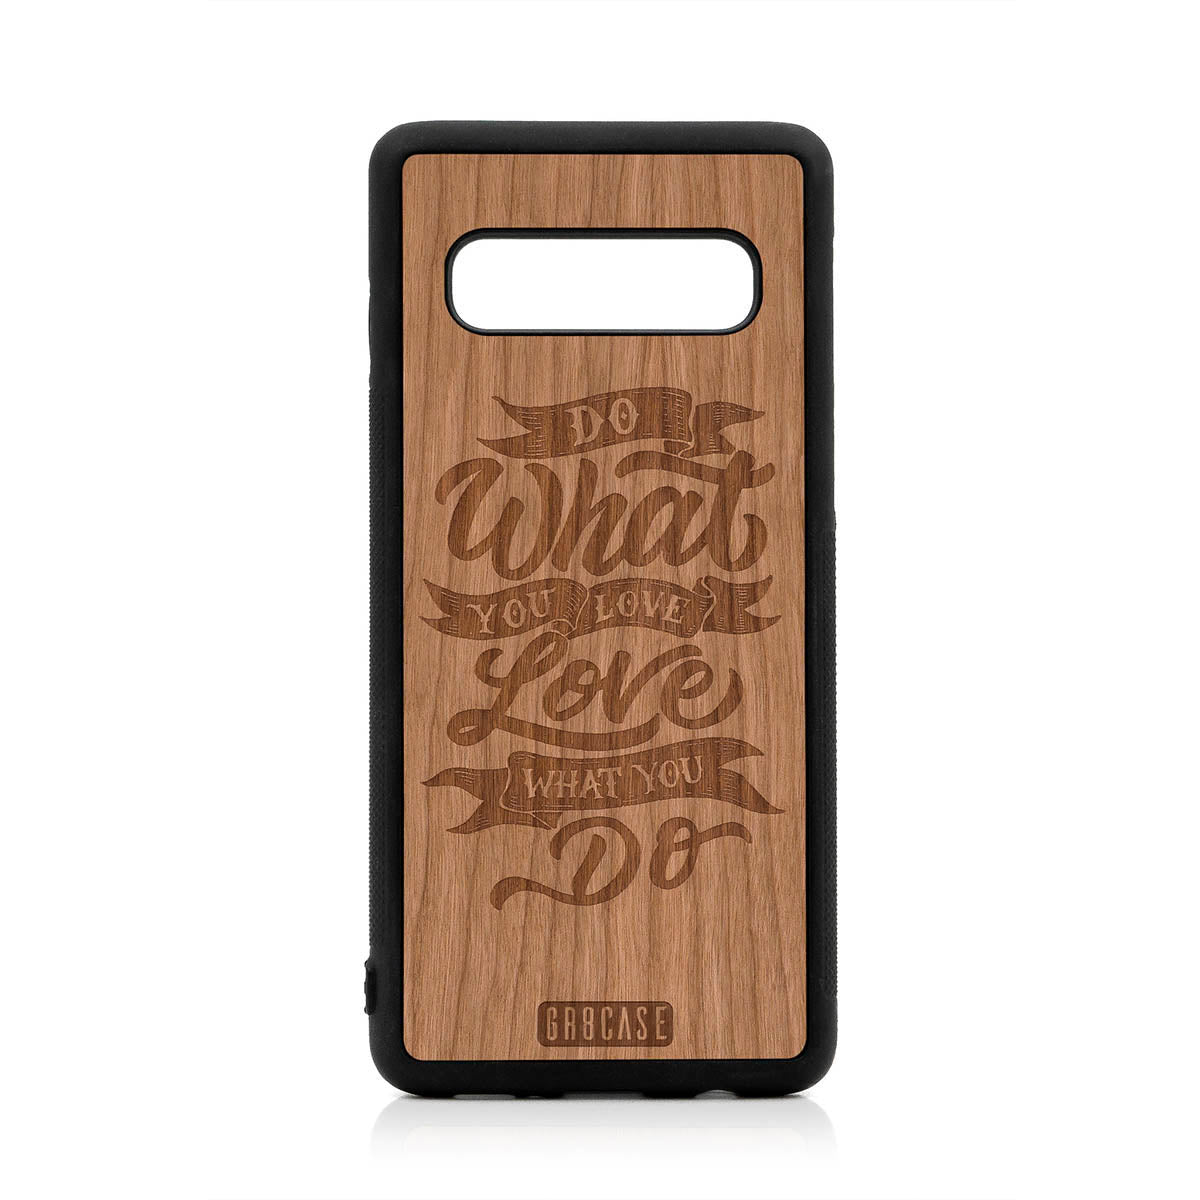 Do What You Love Love What You Do Design Wood Case For Samsung Galaxy S10 by GR8CASE